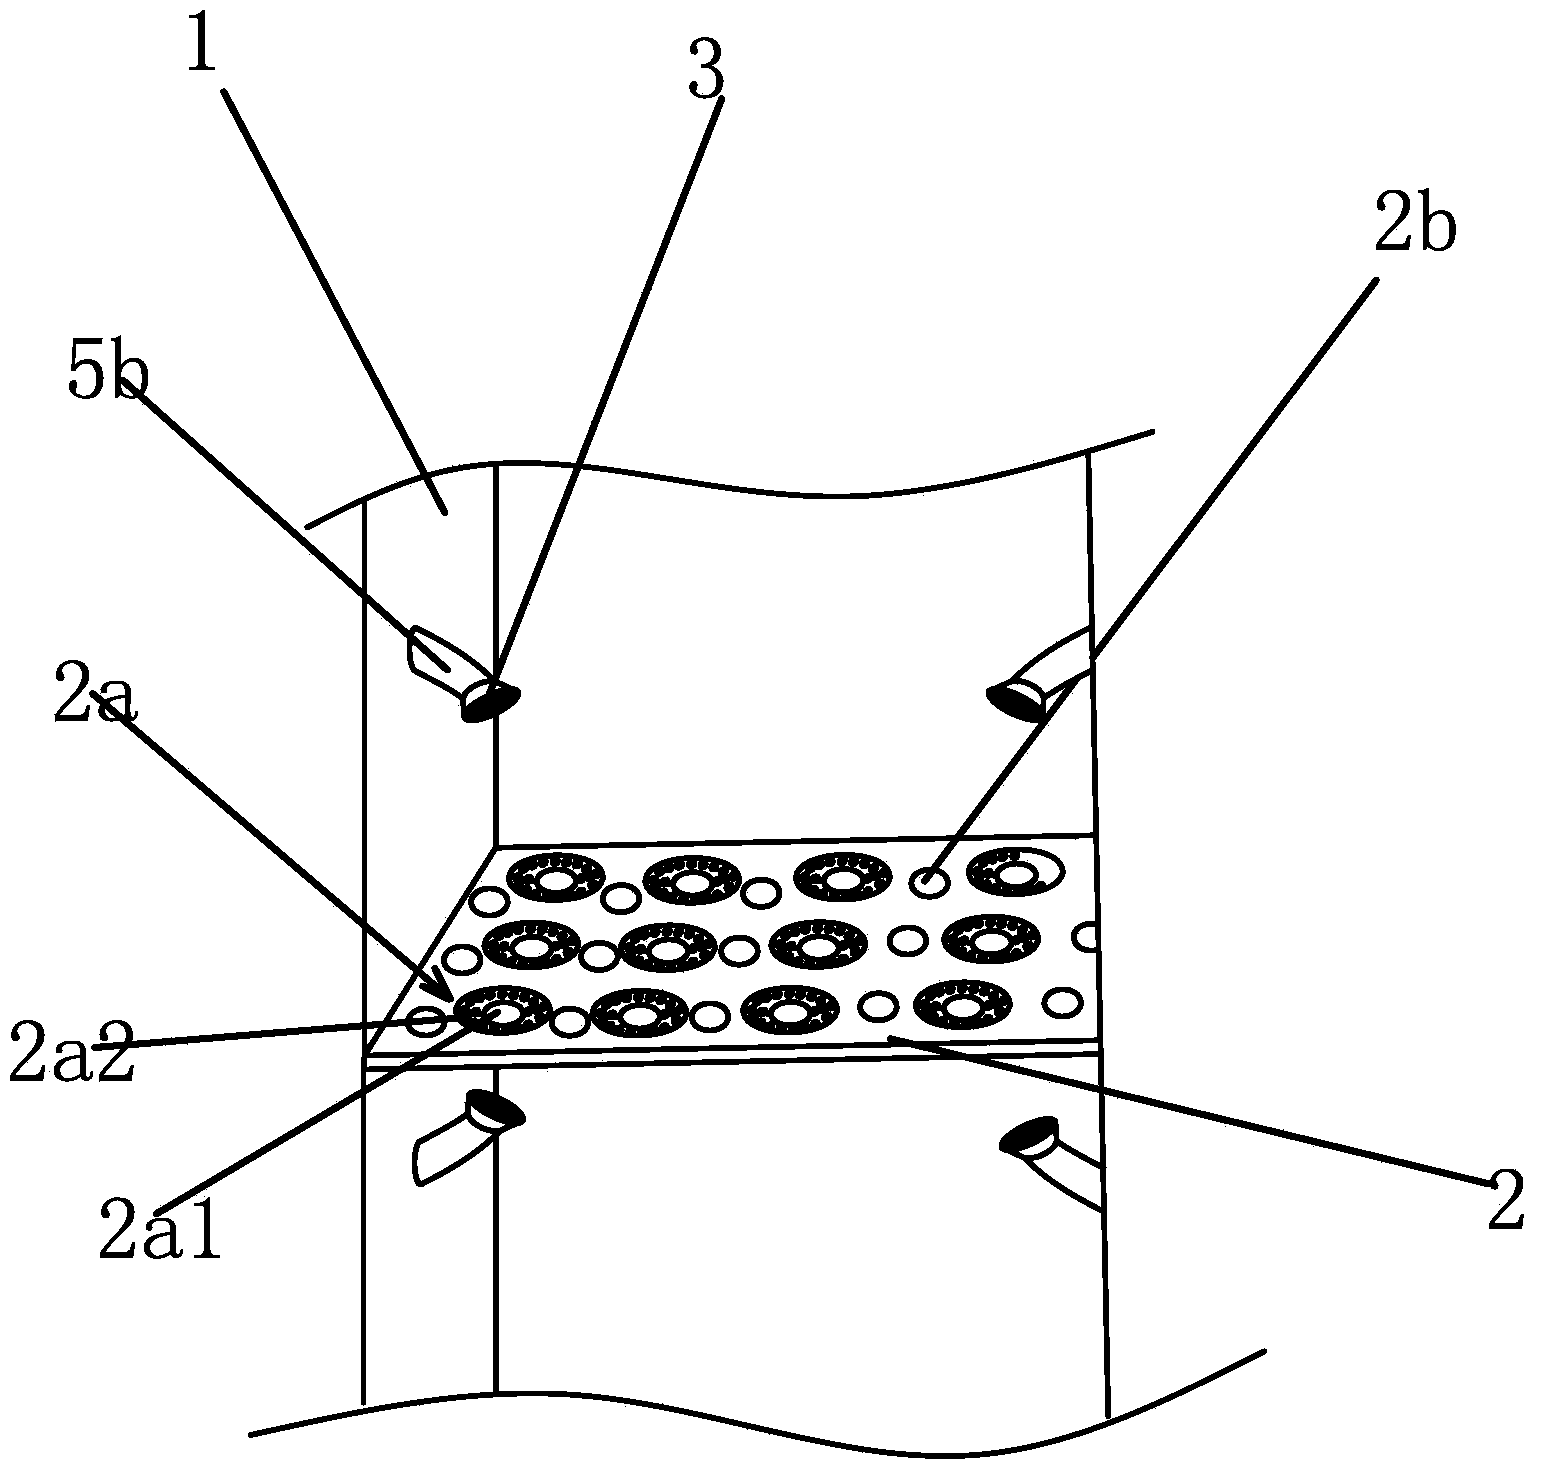 Automatic decontamination device for optical lenses